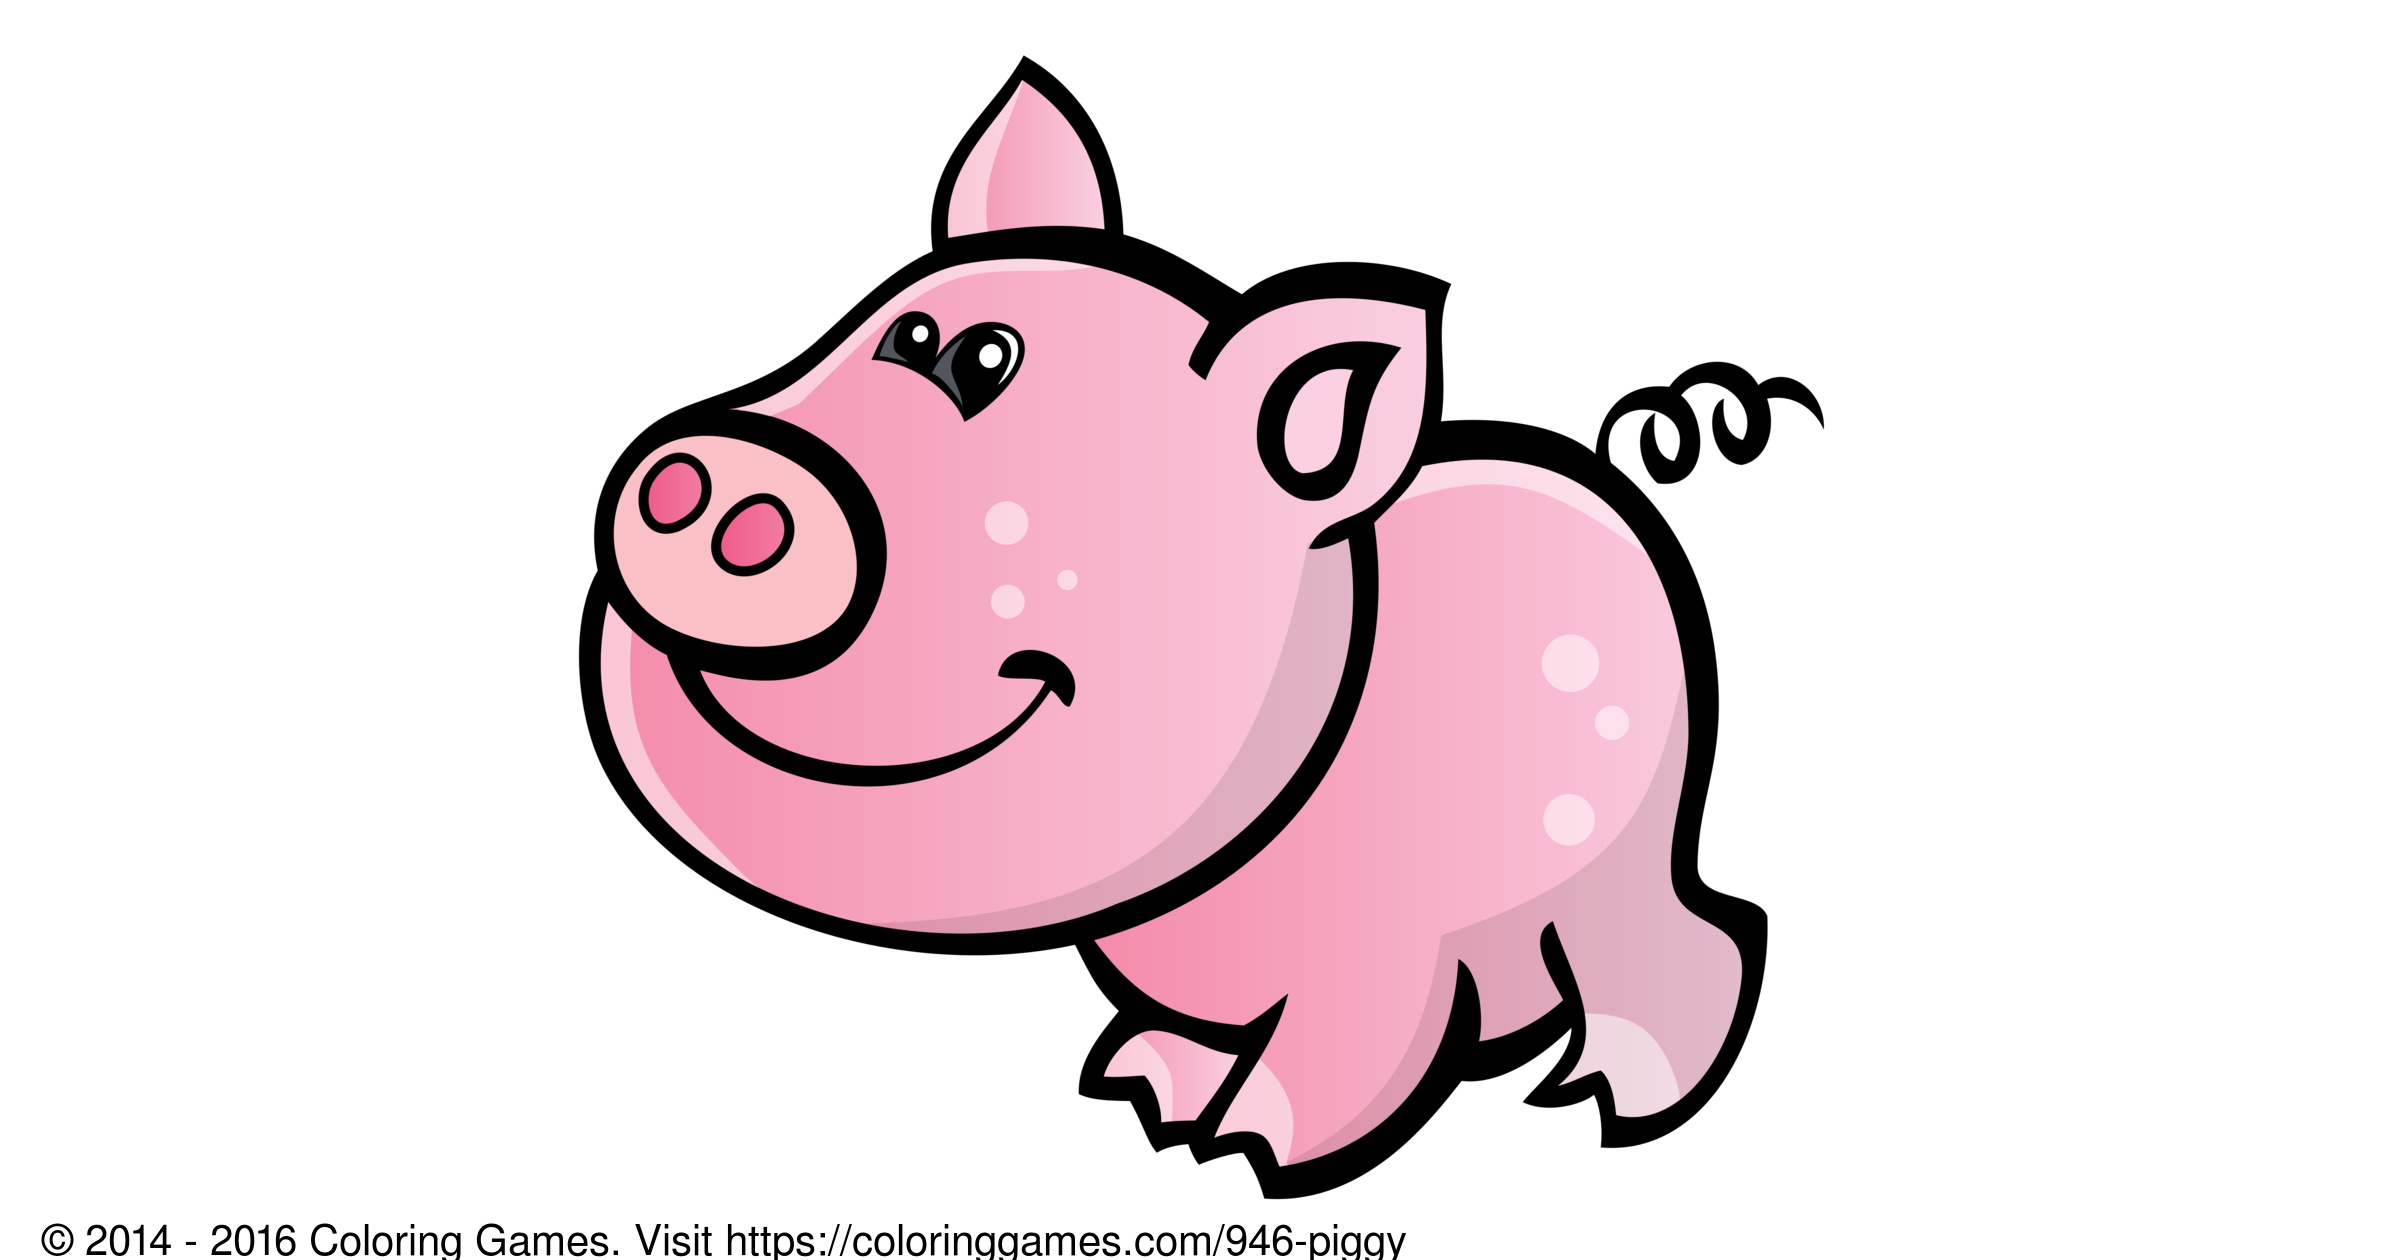 Piggy - Coloring Games and Coloring Pages